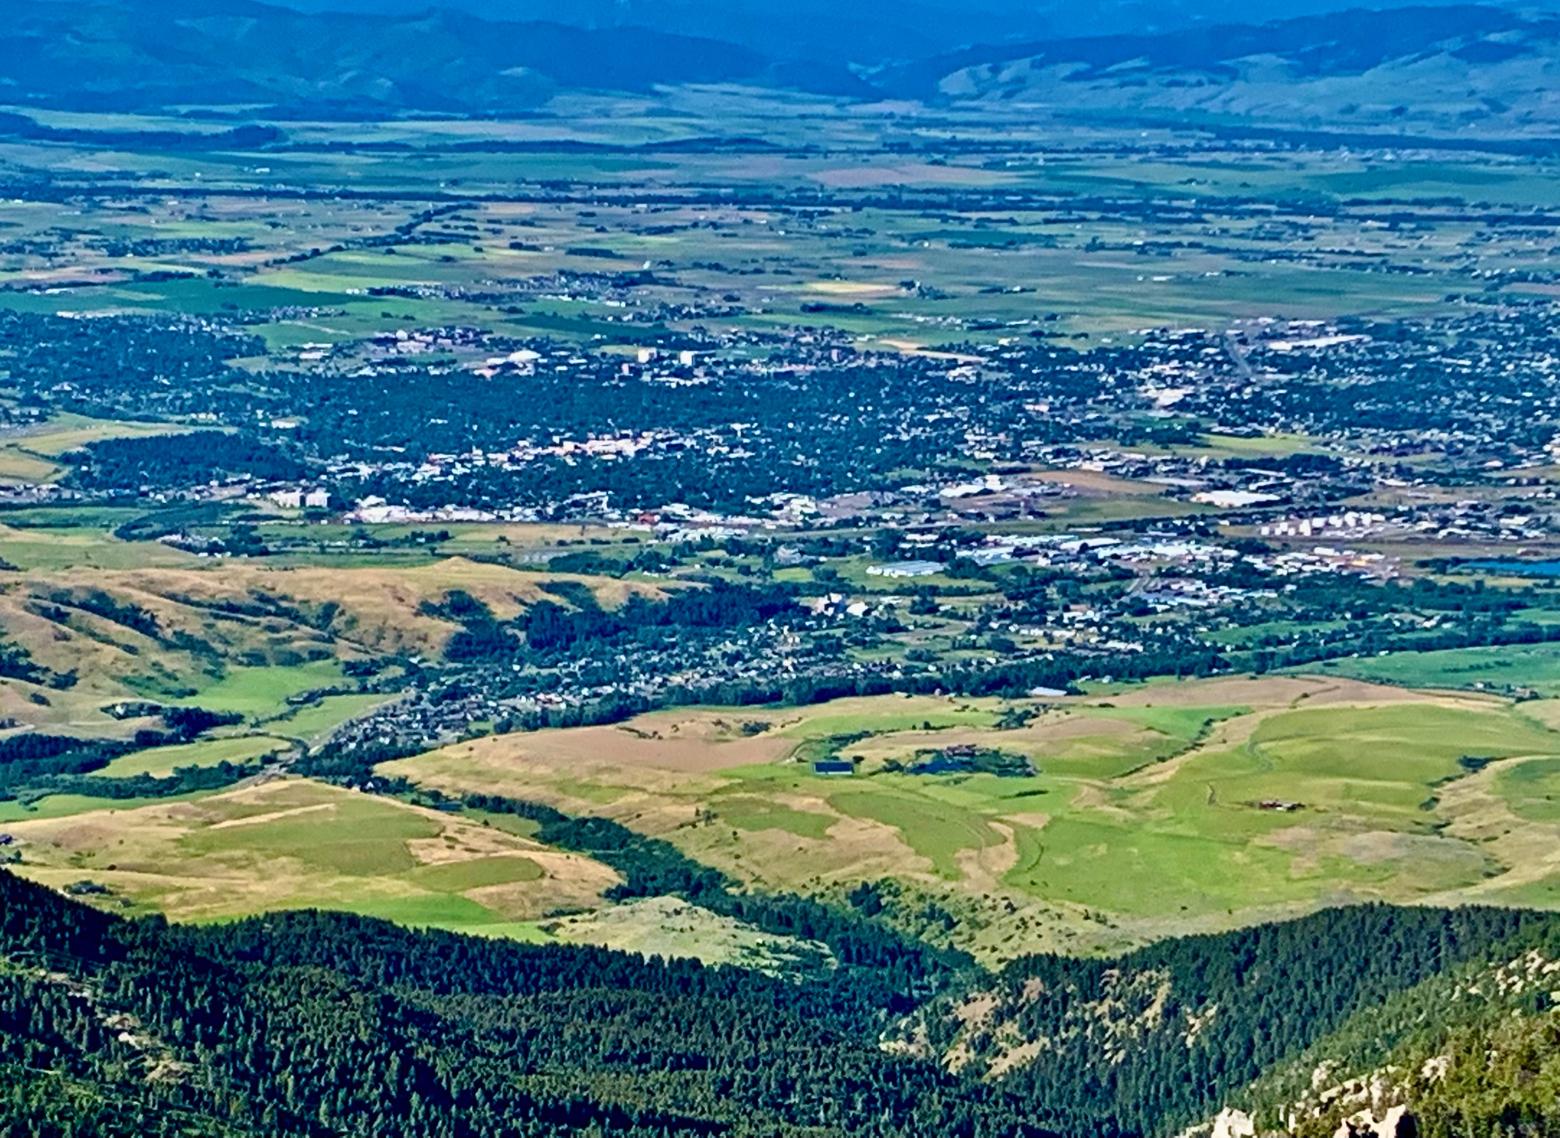 View from the Bridgers looking back toward the northeast edge of Bozeman. Out of view, lower left, is the popular "M" hiking trail. With all due respect offered to the Forest Service and Center for Large Landscape Conservation, how do they imagine the foreground possibly being a viable wildlife migration corridor as the land continues to fill in? Photo by Todd Wilkinson